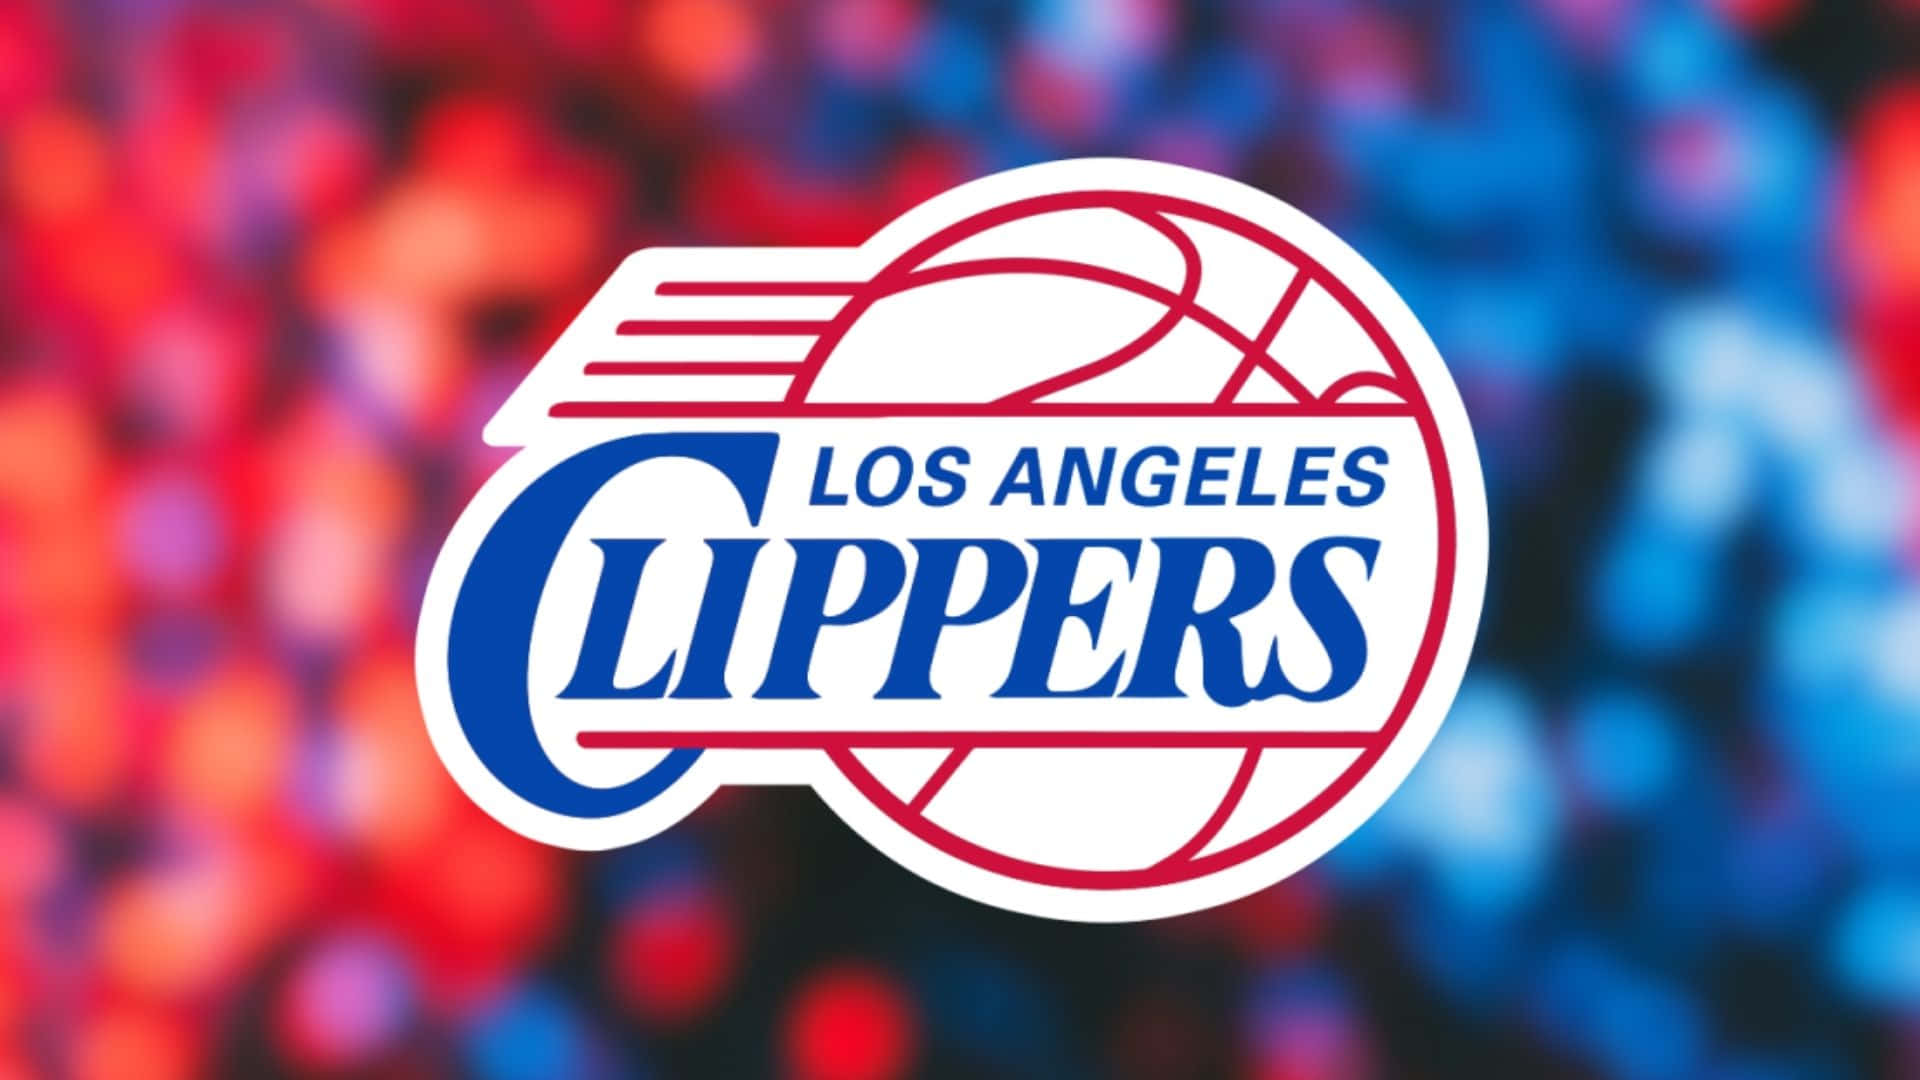 Los Angeles Clippers: Ready to Take Off Wallpaper